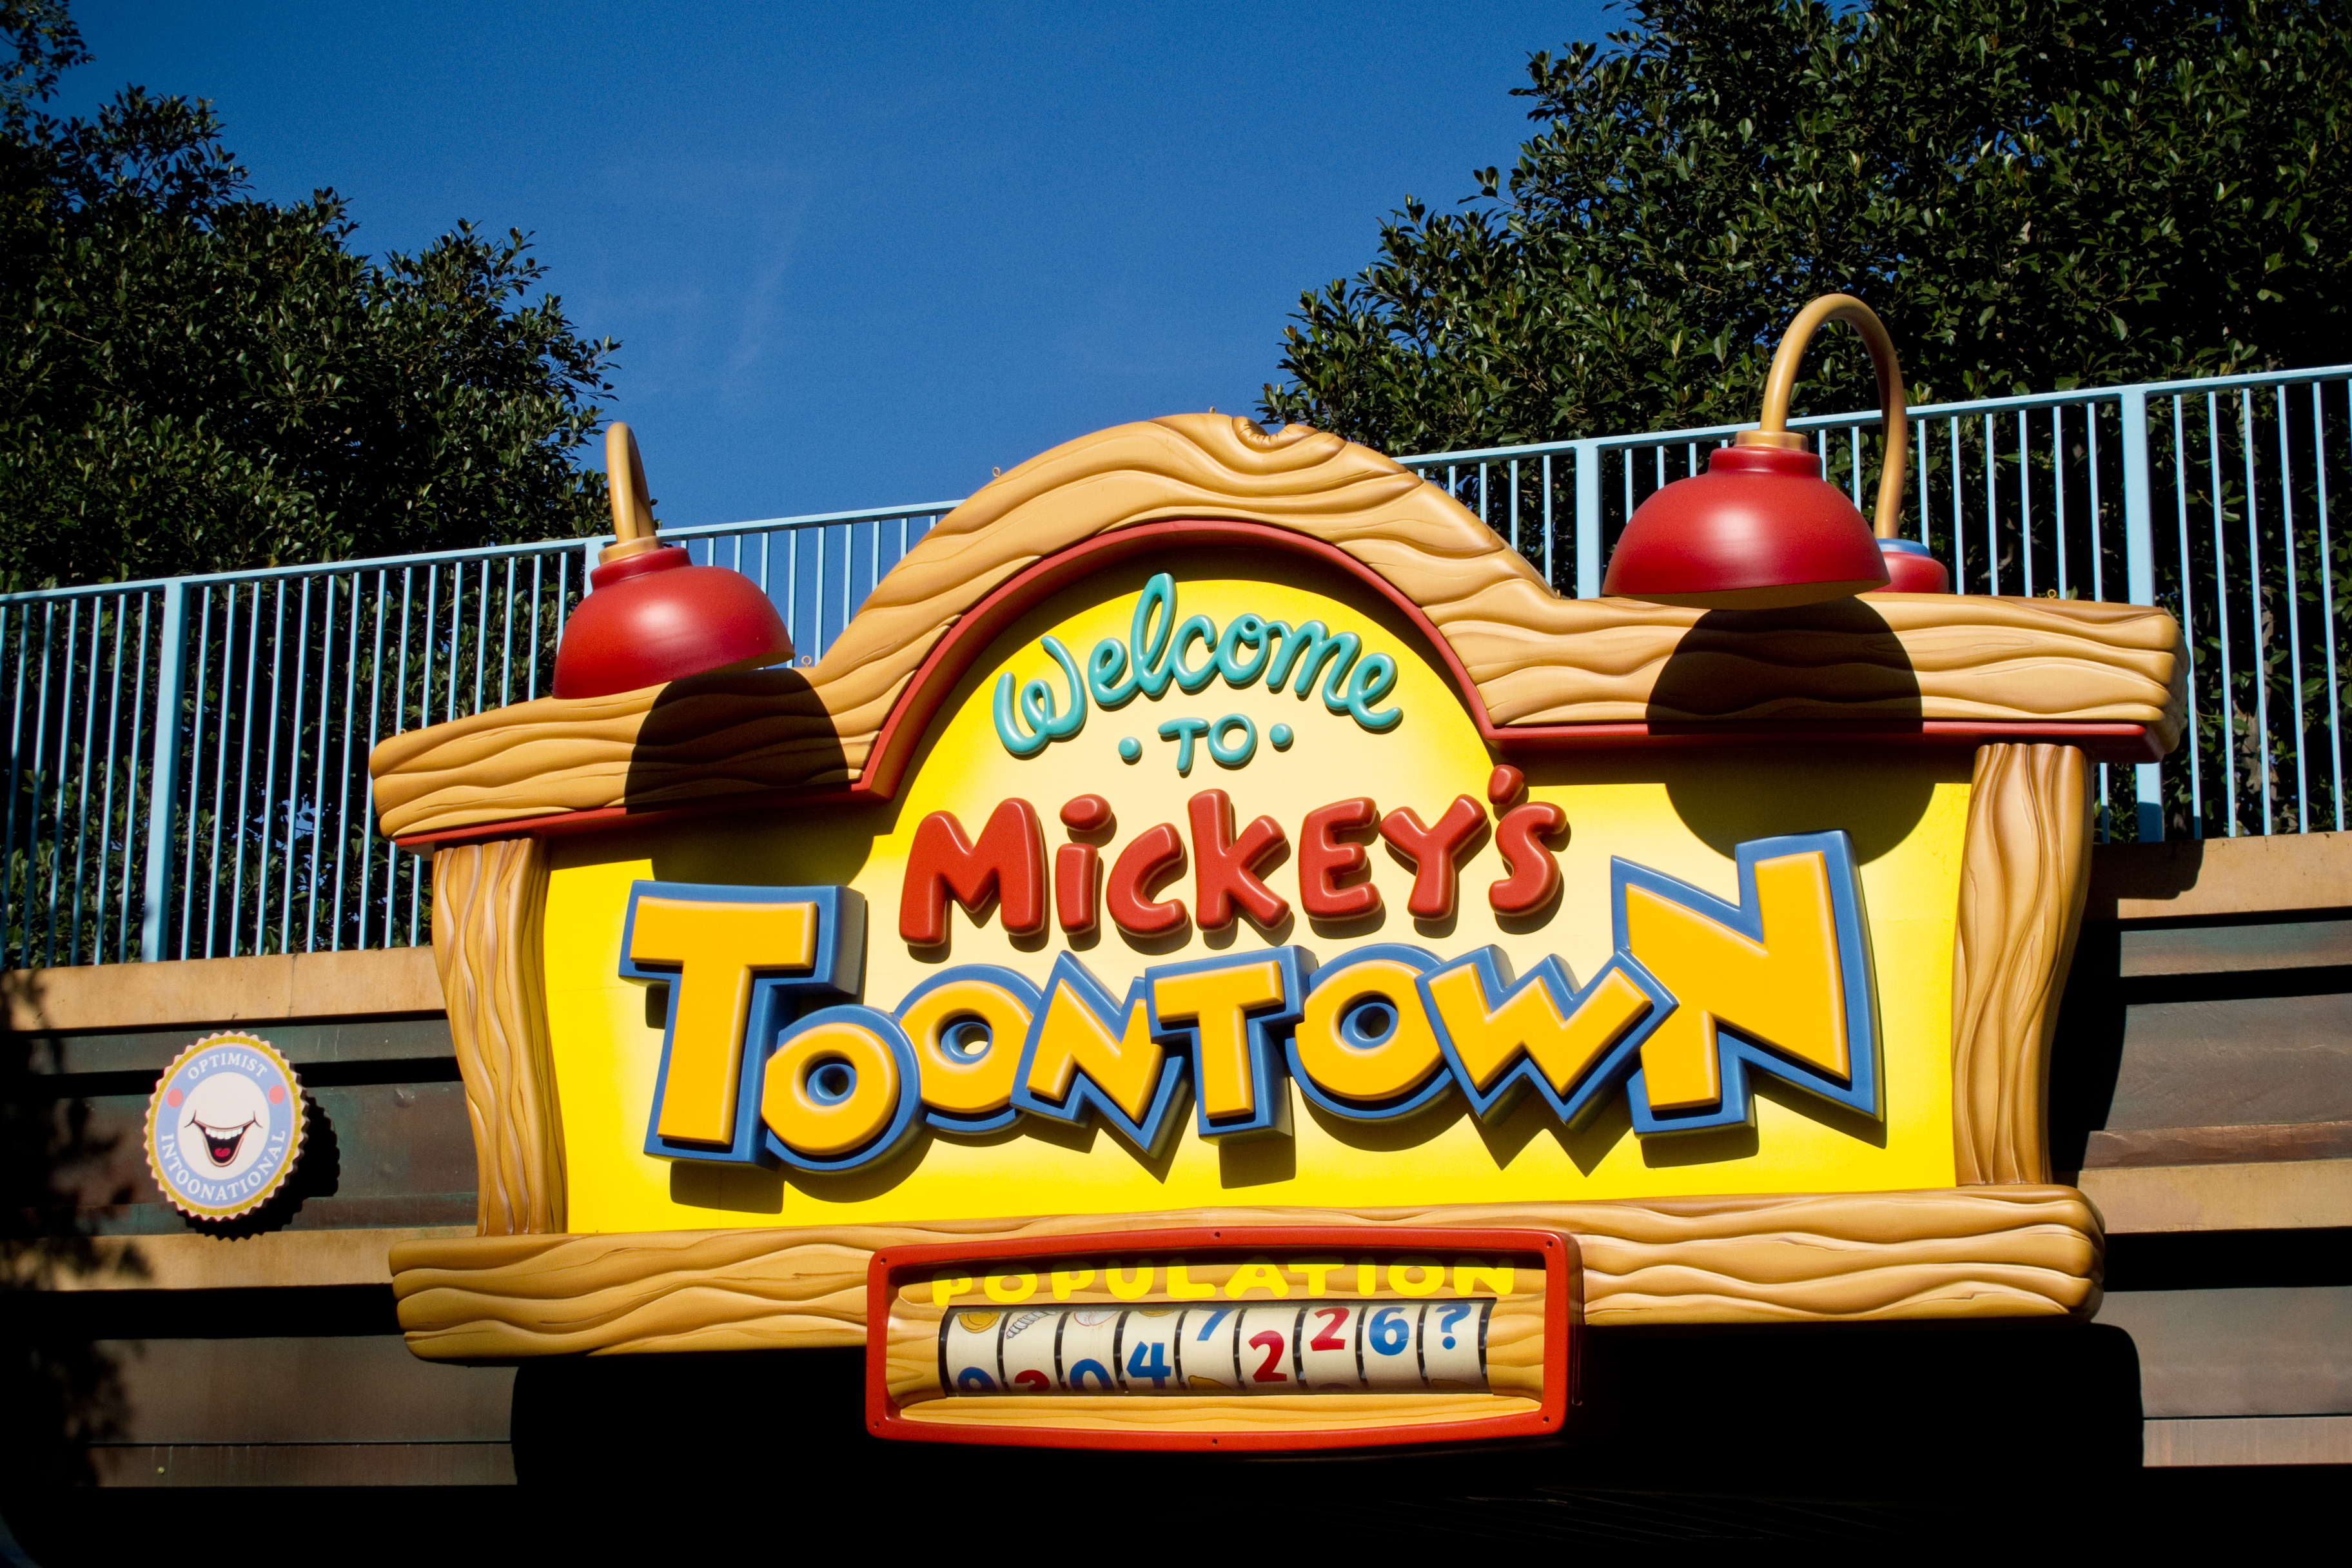 Mickey’s Toontown At Disneyland To Be Reimagined And To Be Reopened In Early 2023